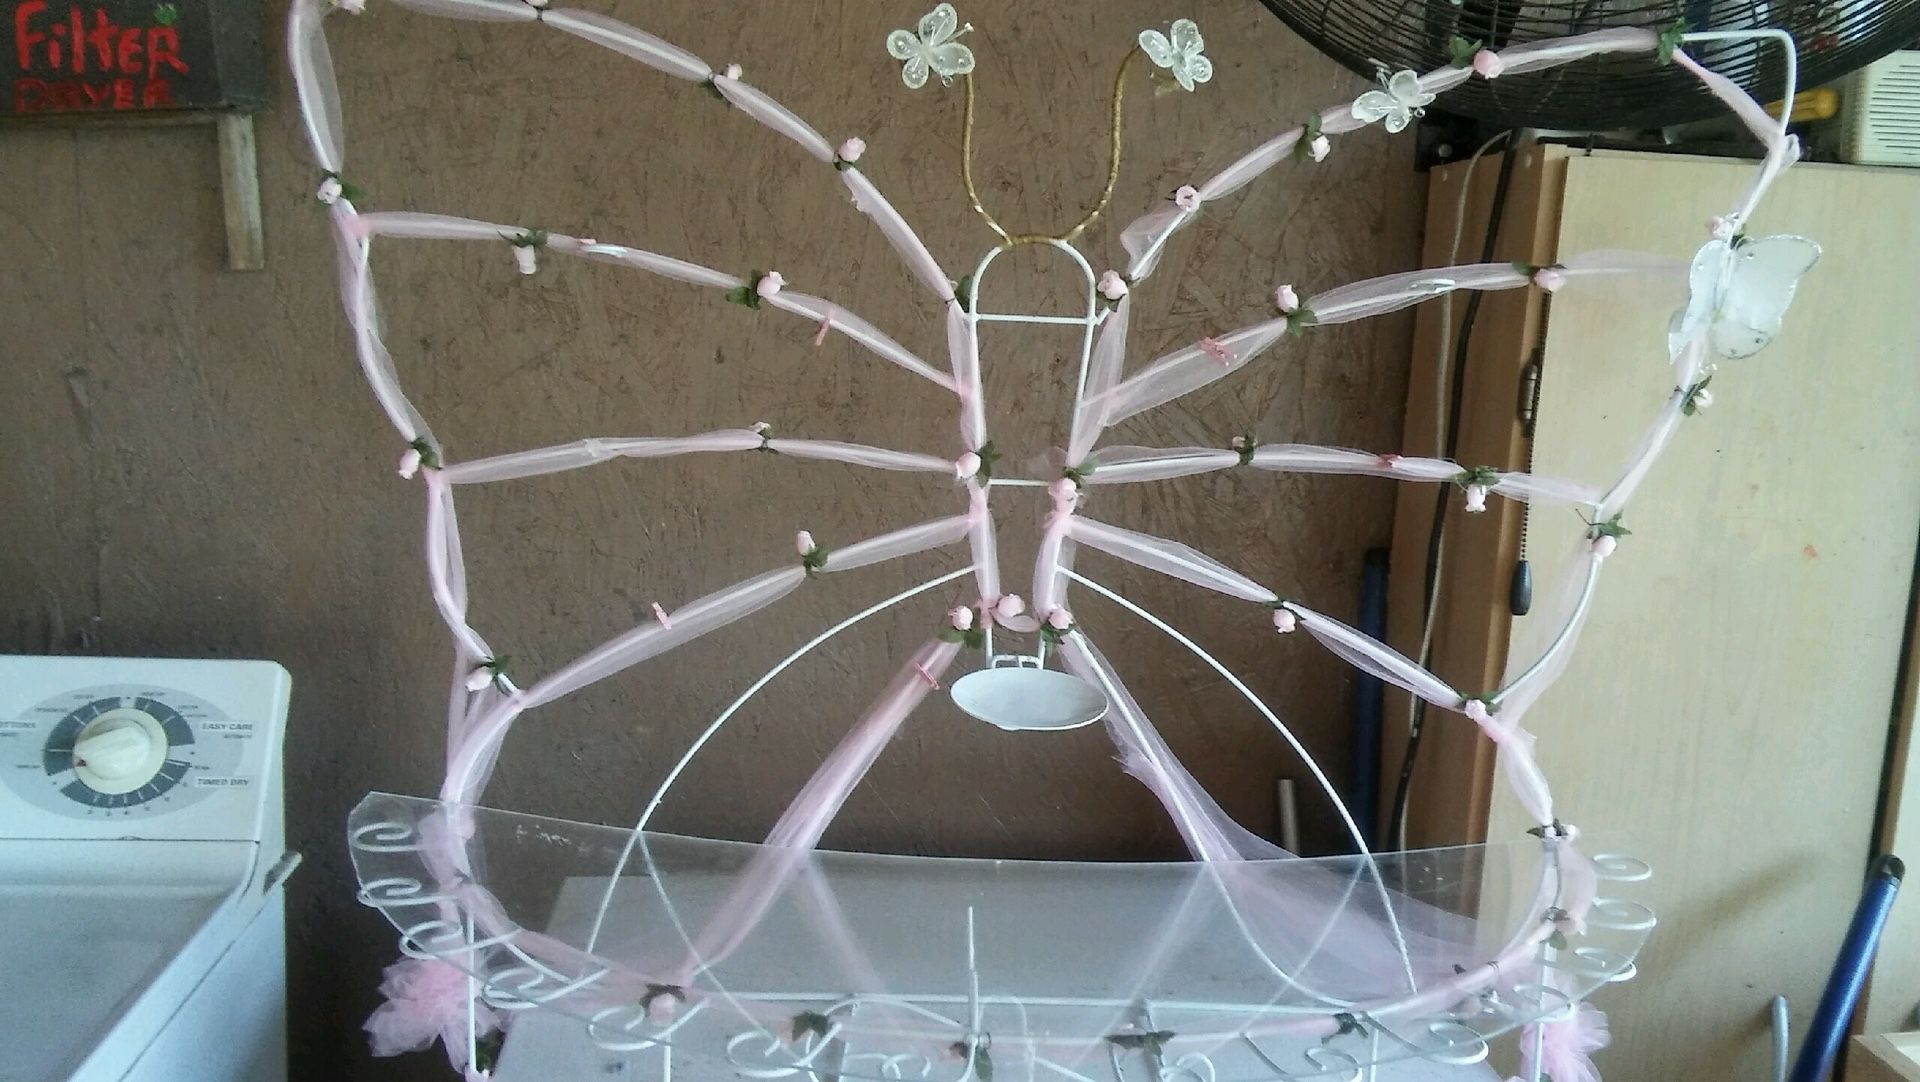 Butterfly backdrop or cake stand